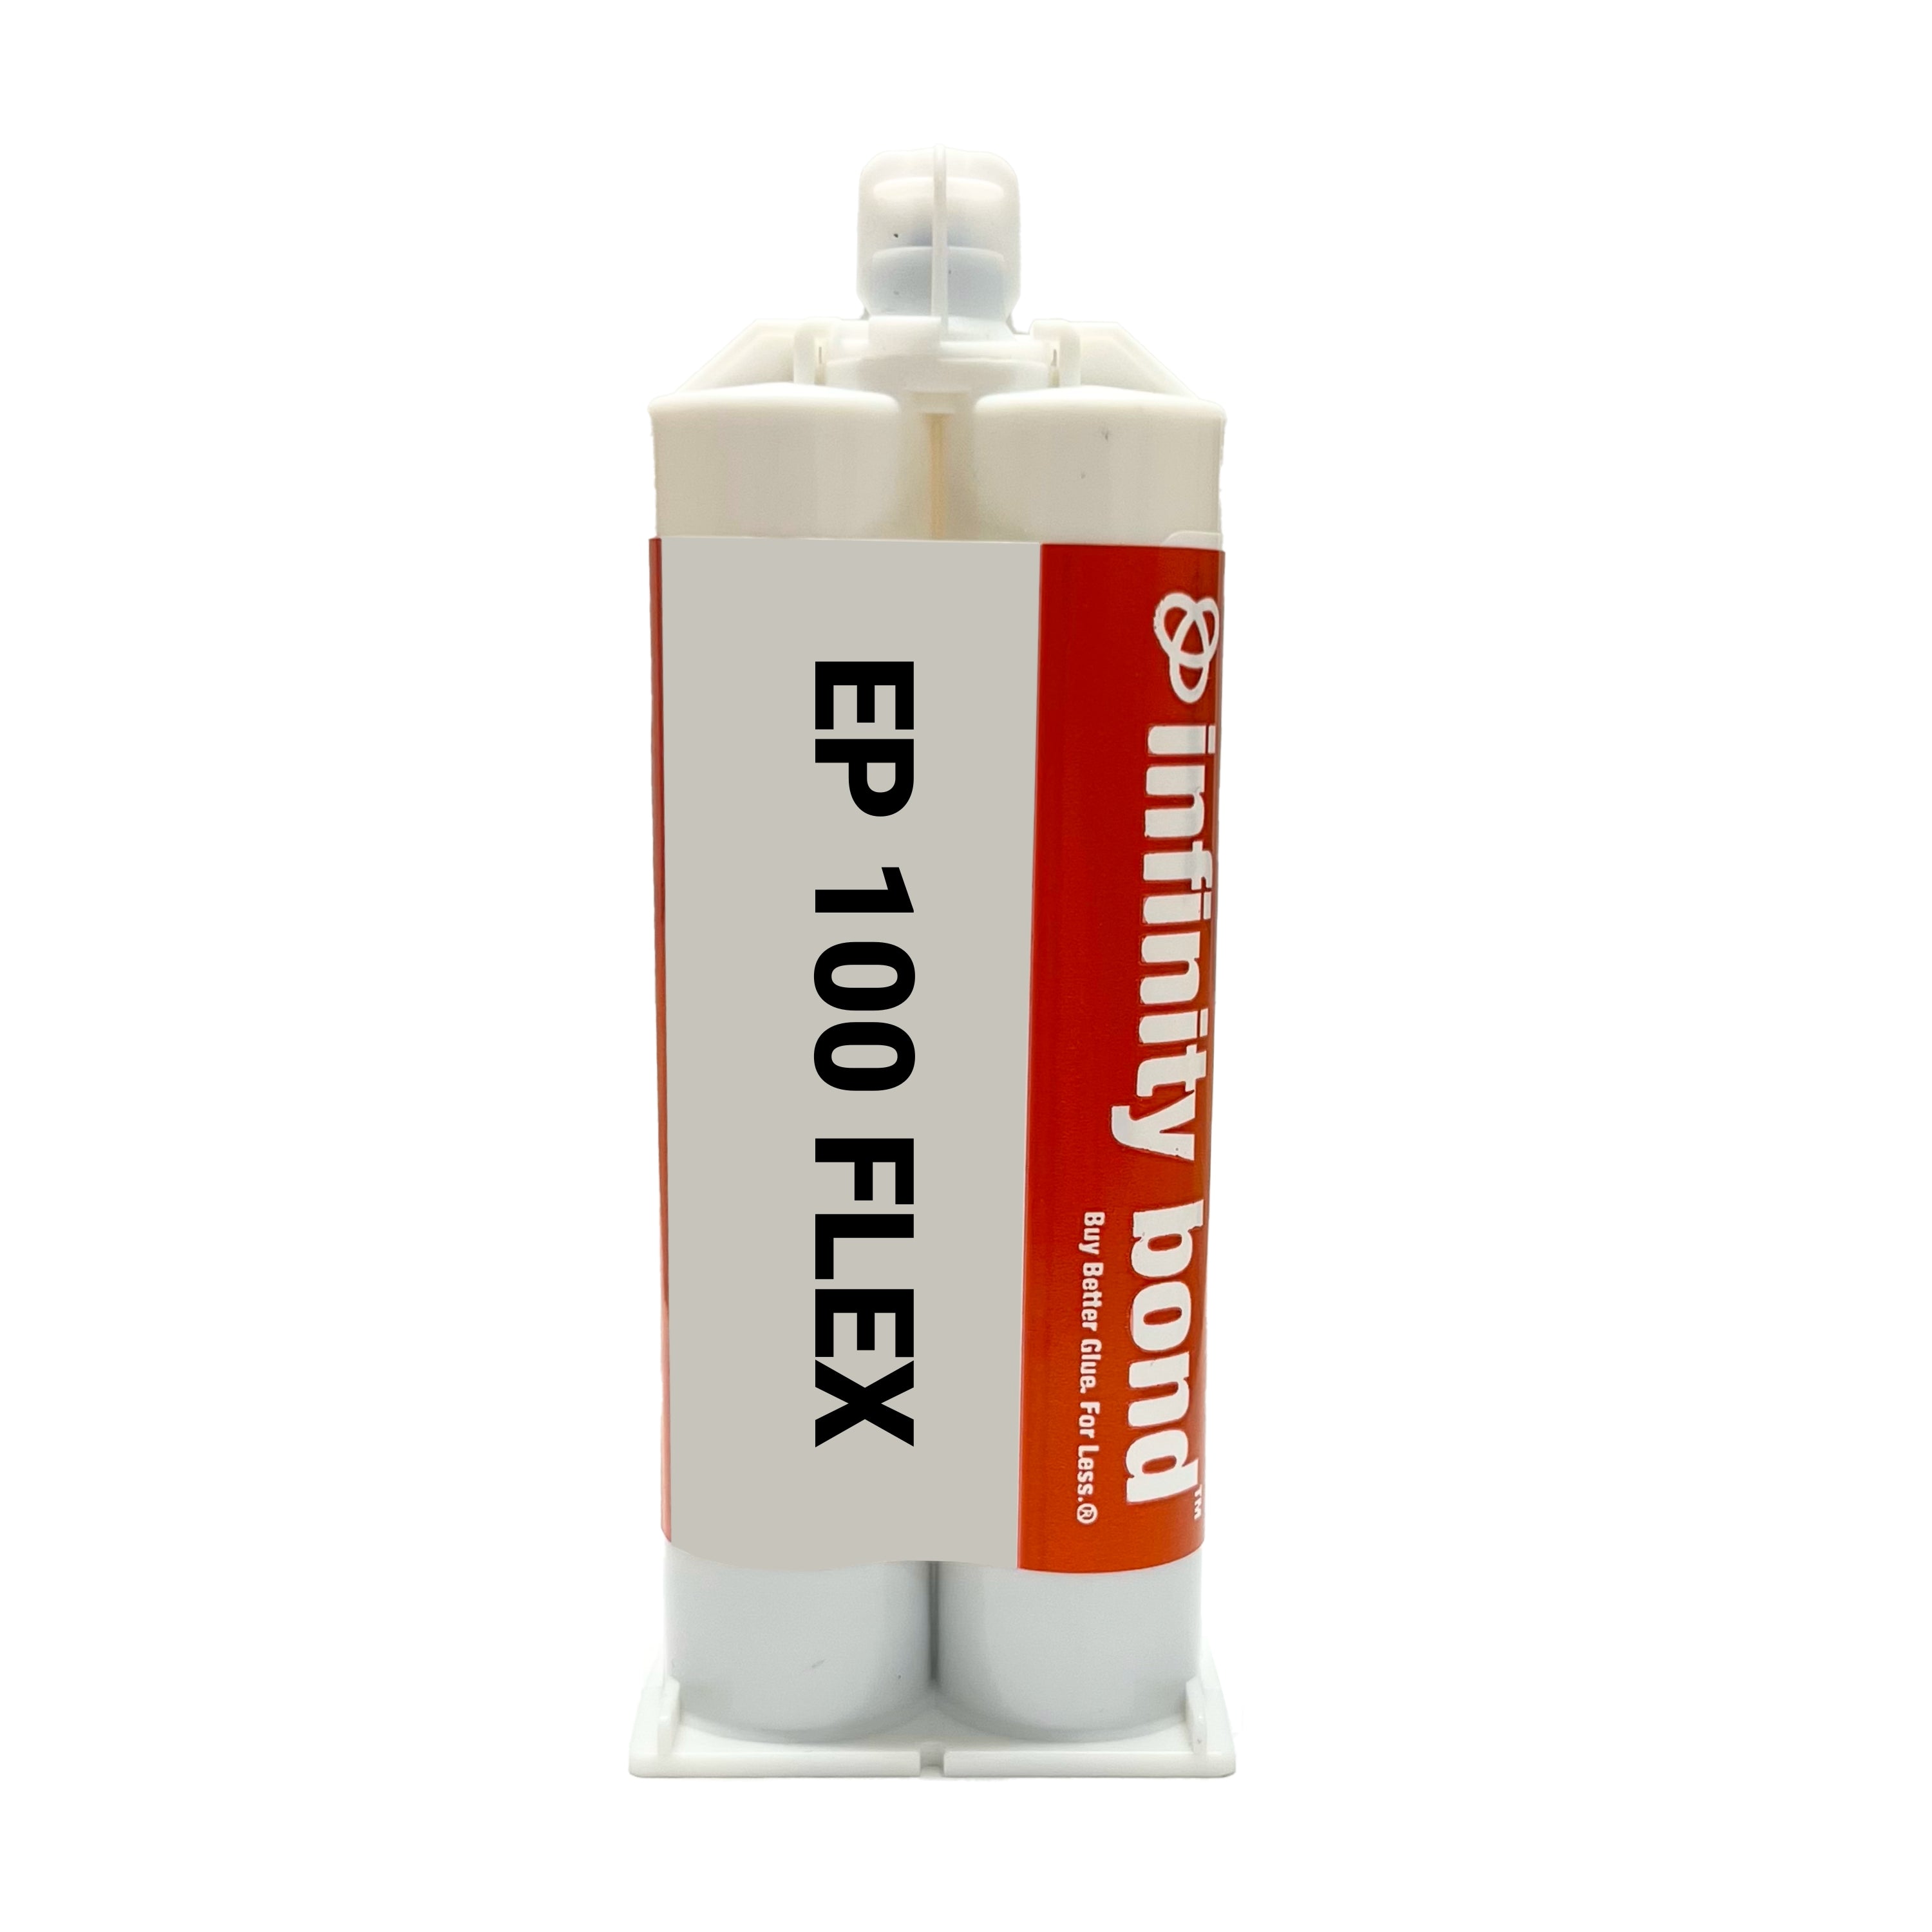 Infinity EP 100 FLEX Vibration and Shock Resistant 5-Minute Epoxy